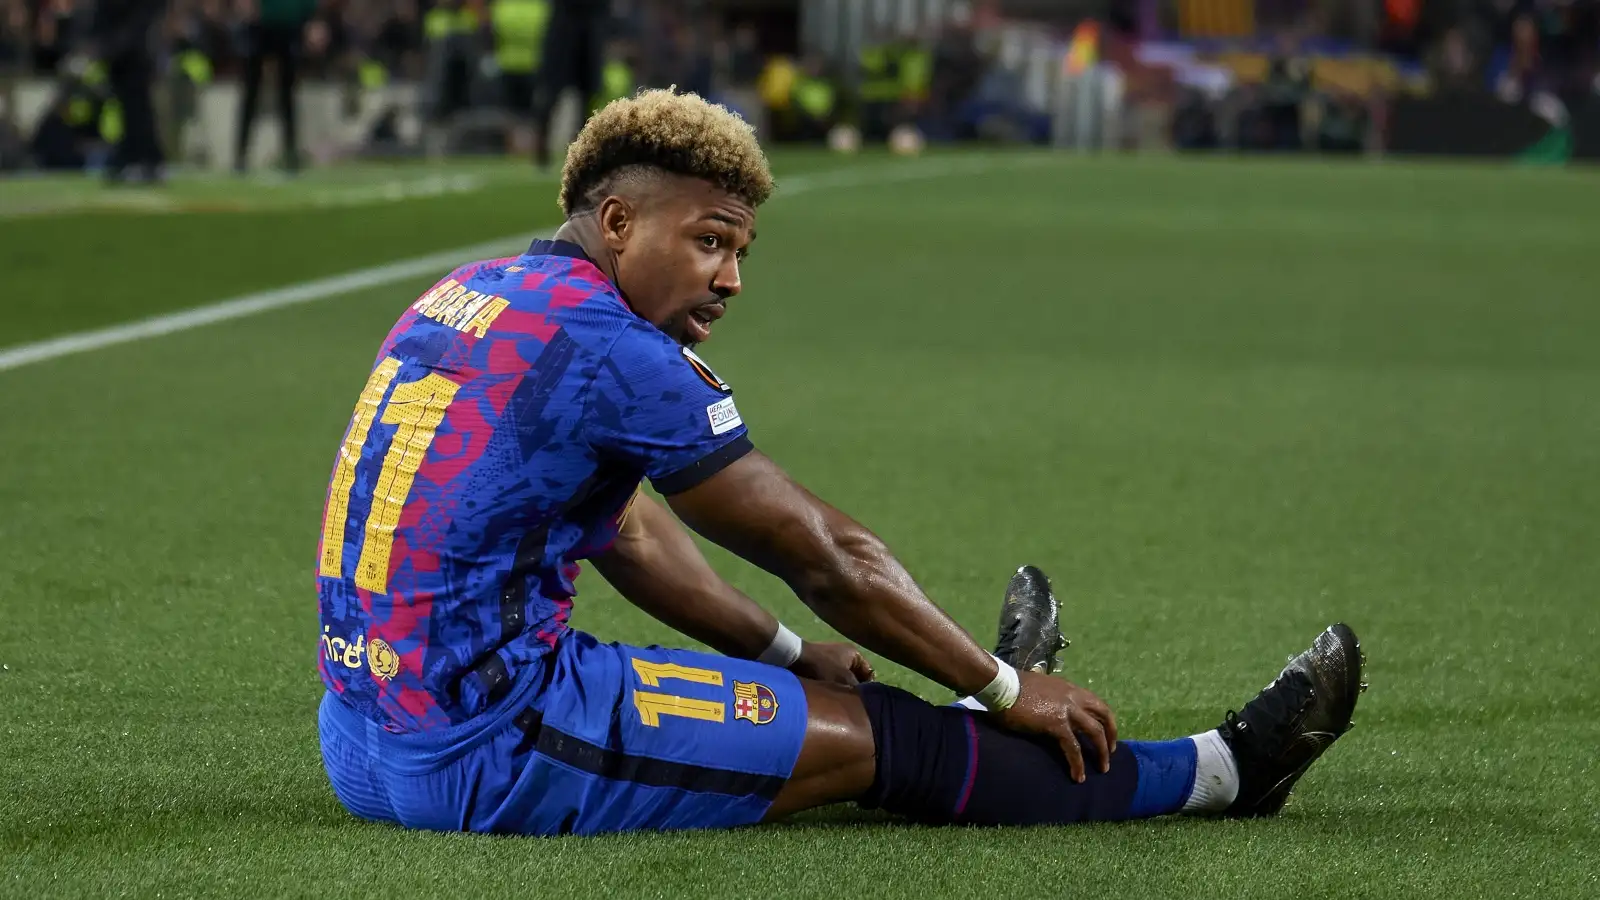 Barcelona winger Adama Traore lies injured on the pitch